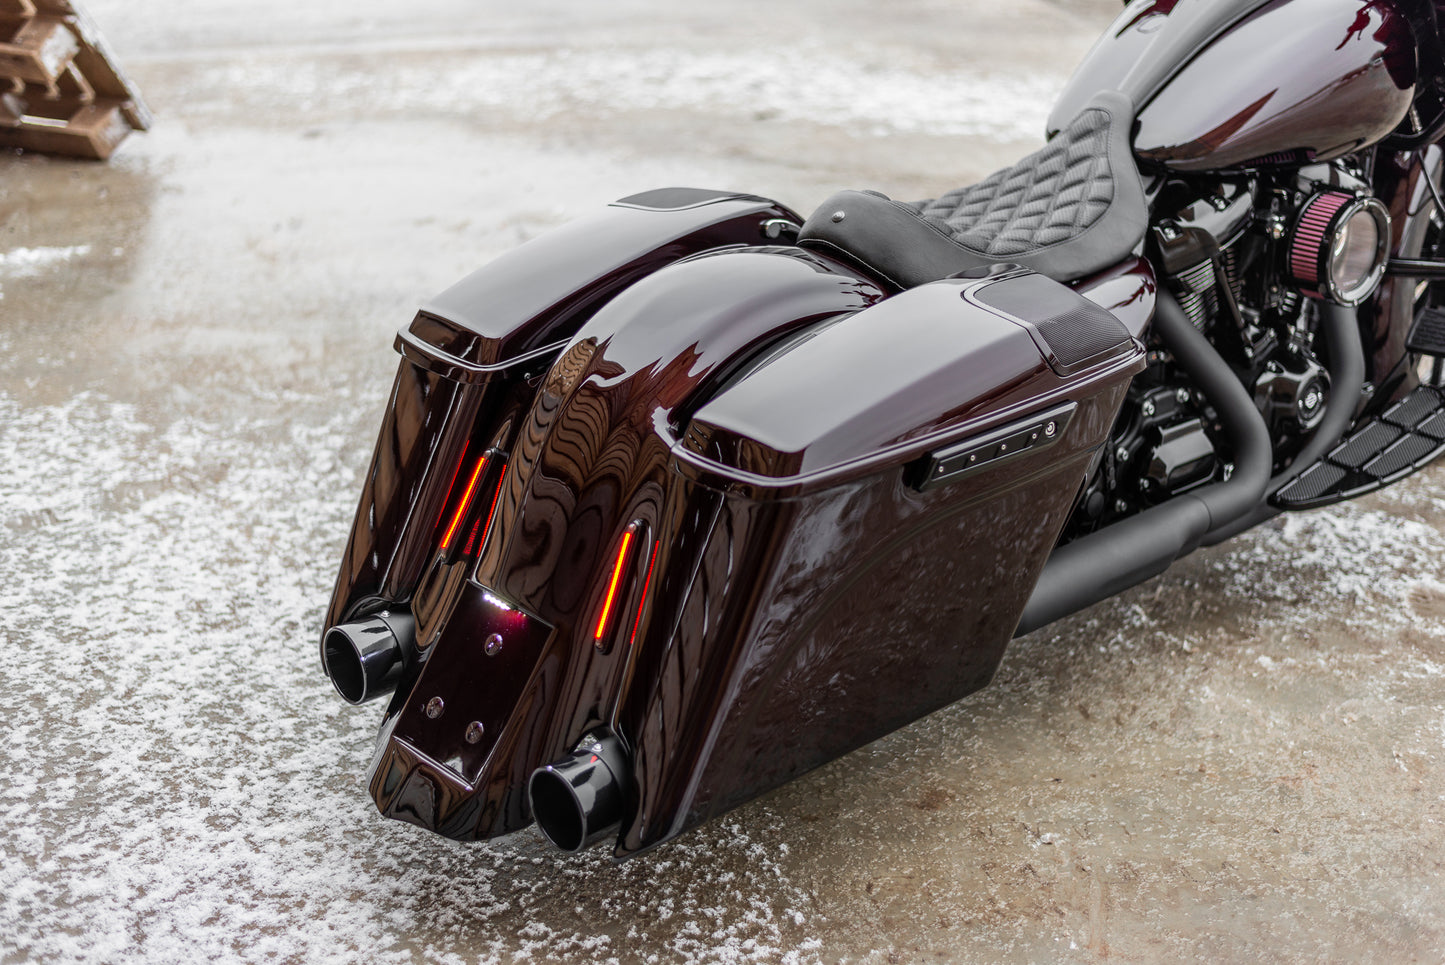 Harley Davidson motorcycle with Killer Custom saddlebag latch hinge inserts from the rear with visible snow on the ground